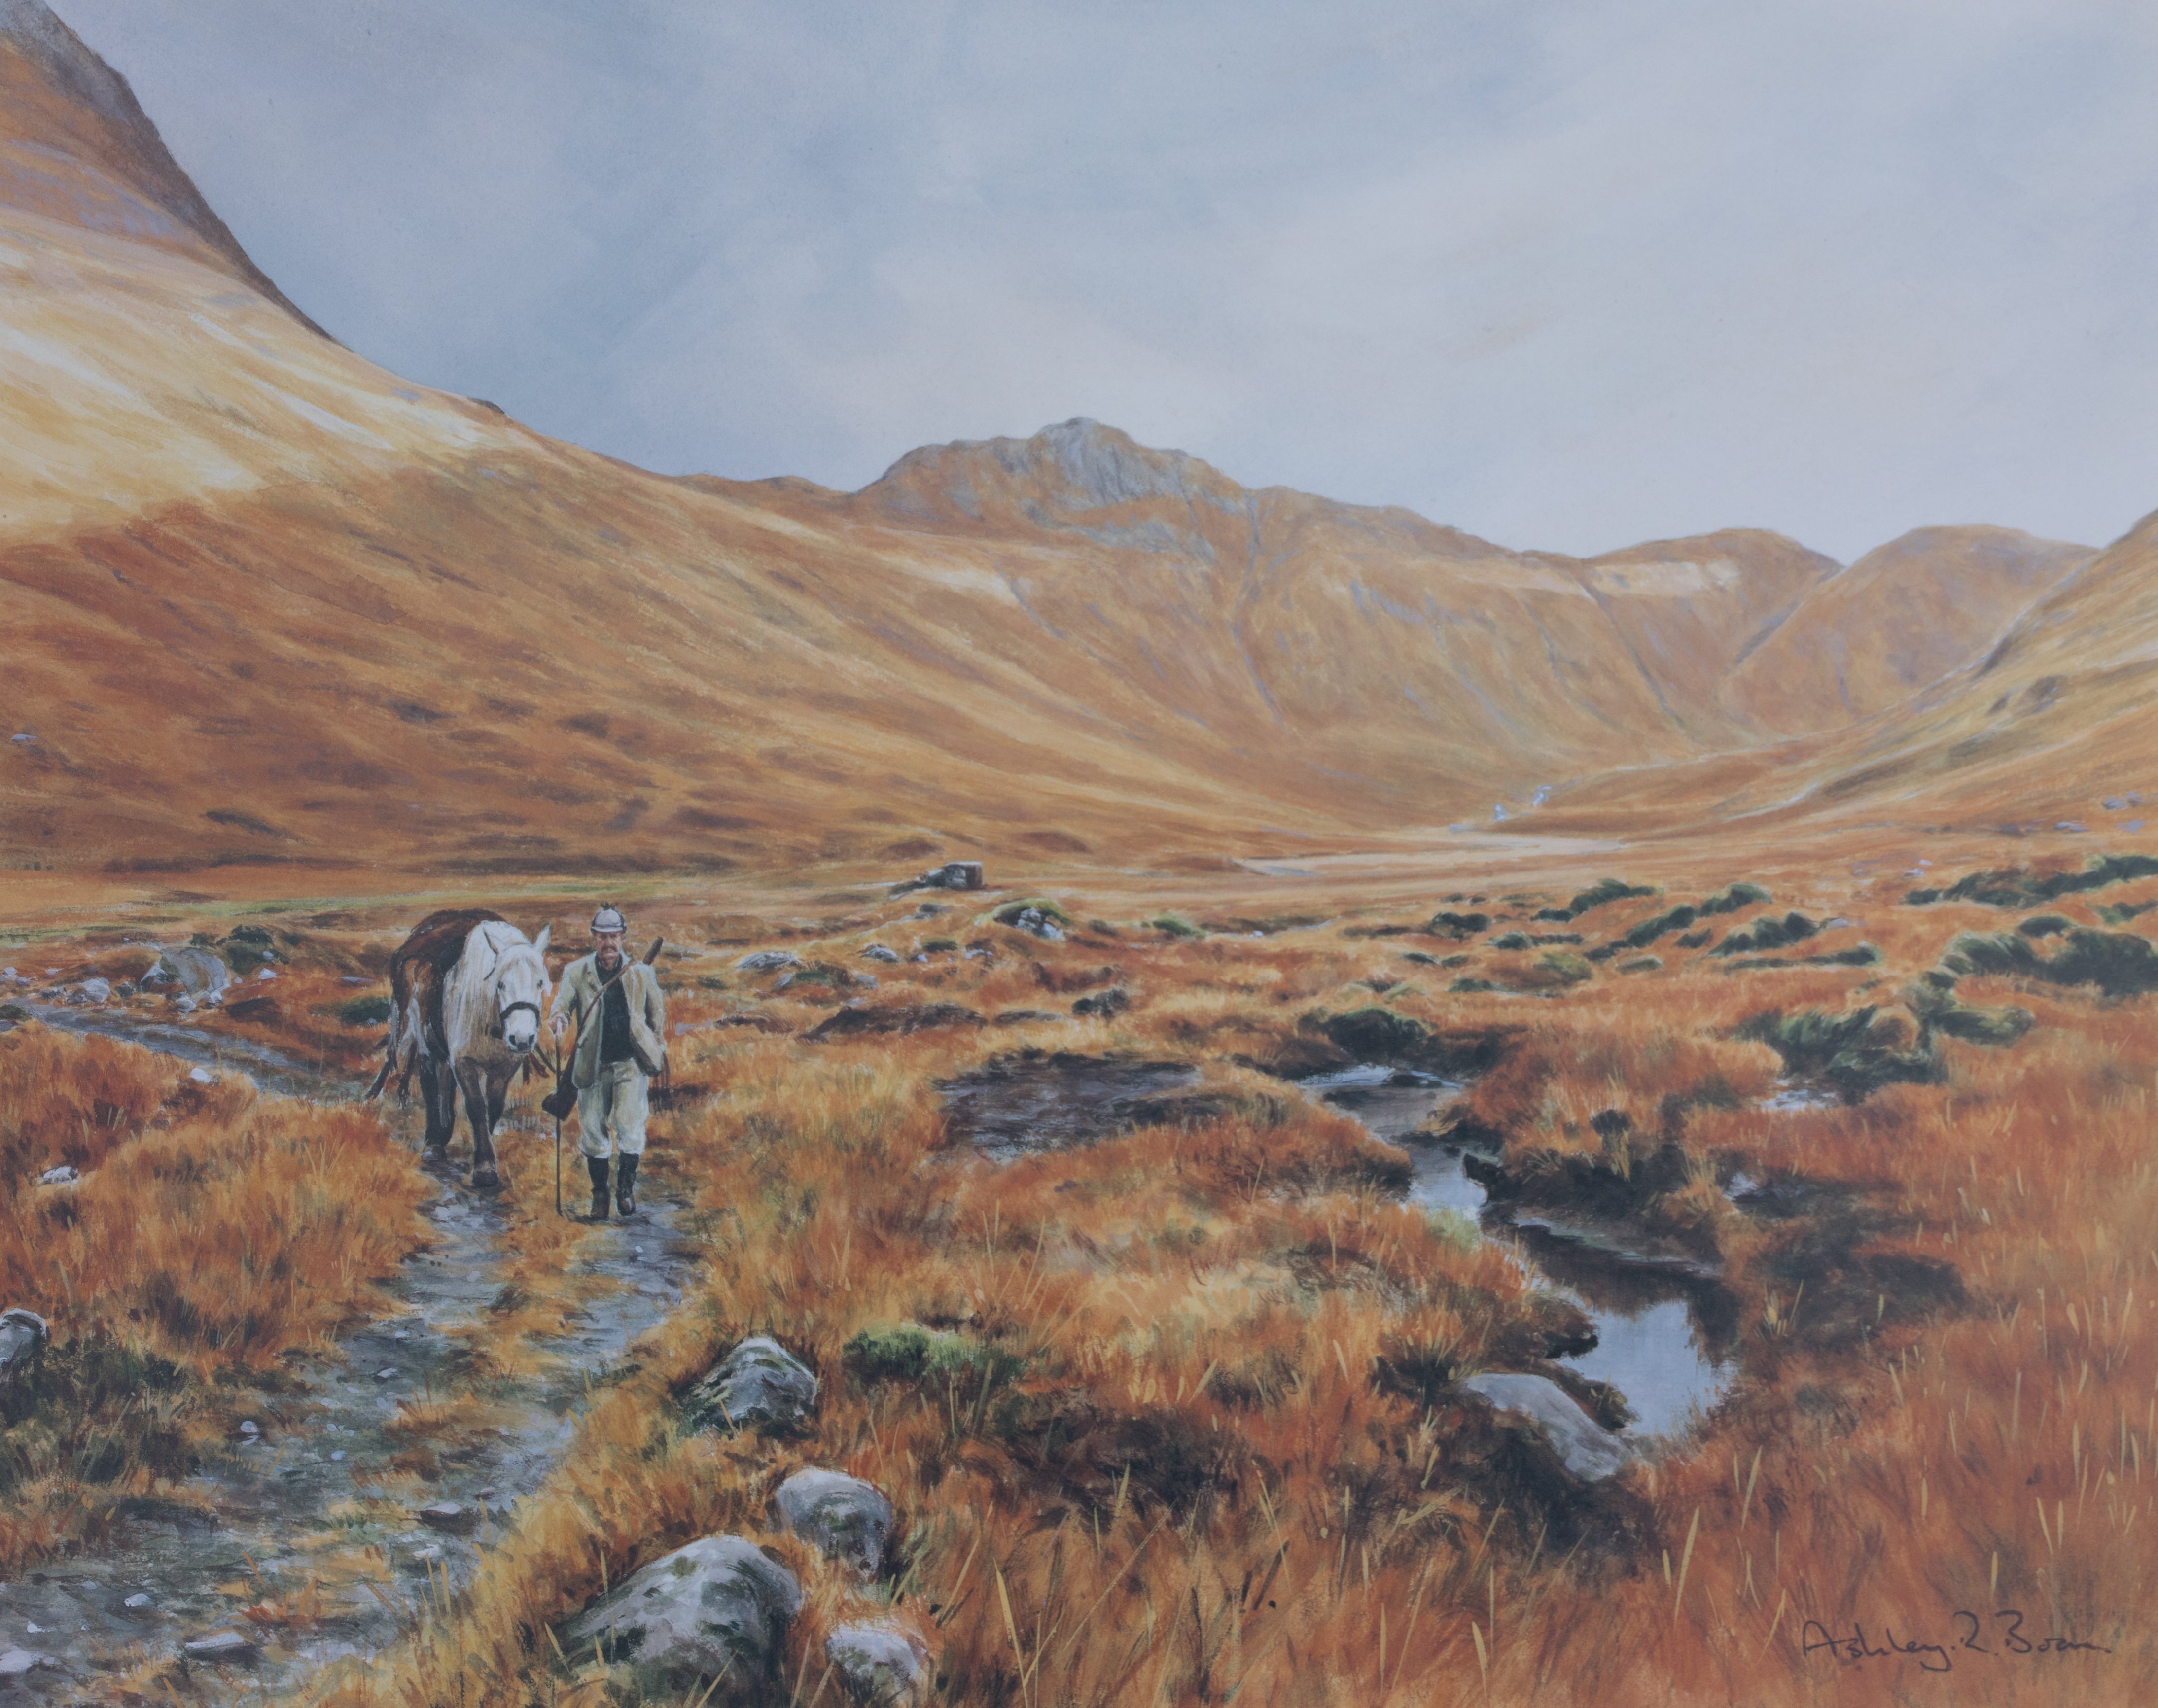 020. 'Coming Home, Kinloch Hourne' Limited Edition Print (100 only) by Ashley Boon - 14.5" x 18.25"